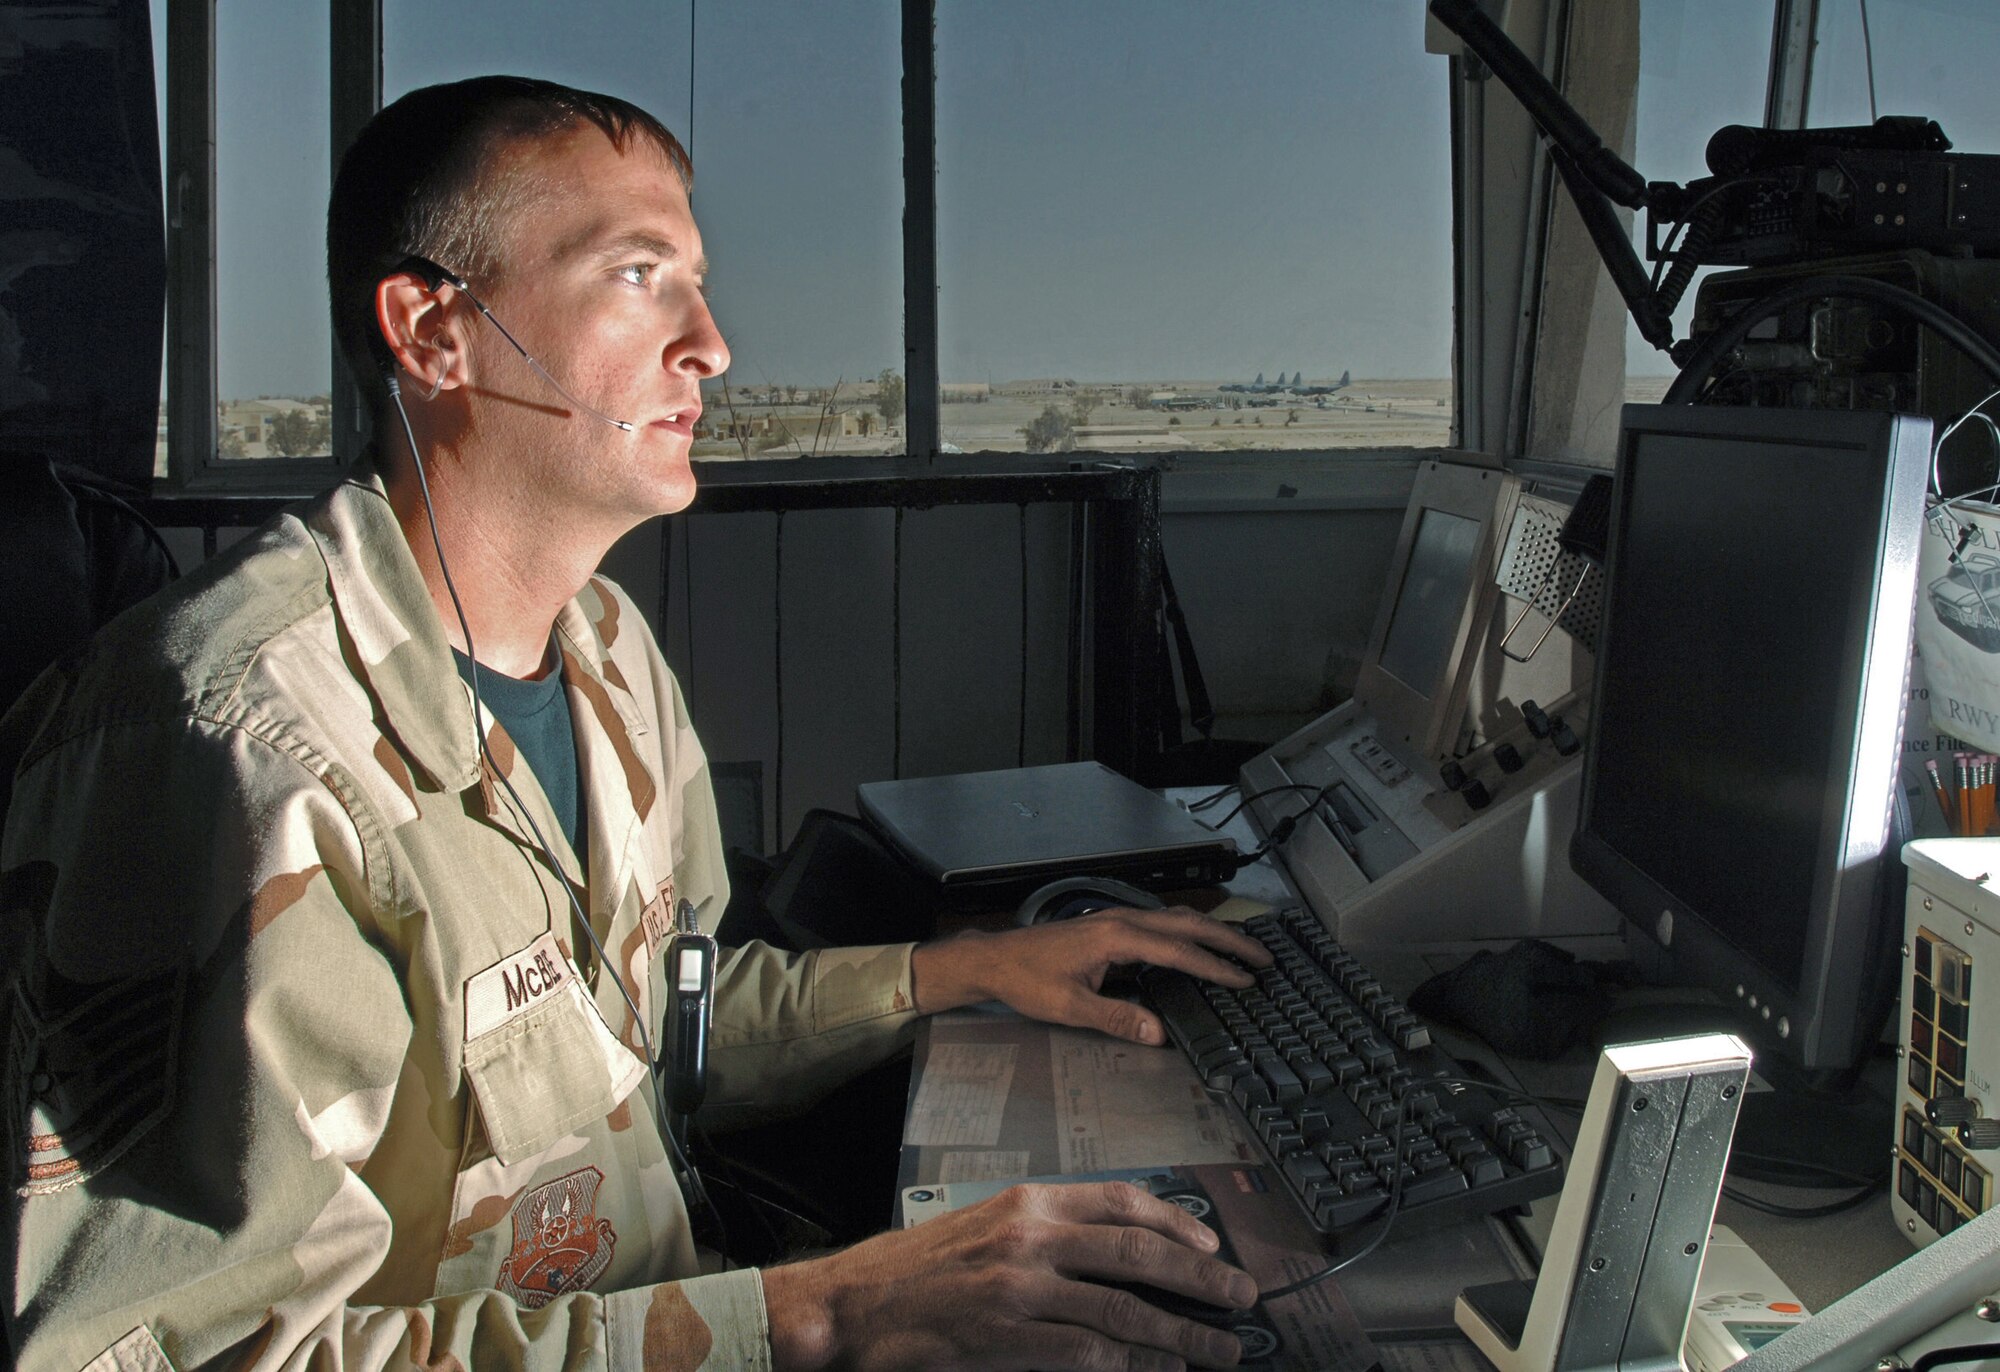 ALI BASE, Iraq -- Tech. Sgt. Chad McBee checks local weather to relay to a pilot. Sergeant McBee is a tower controller with the 407th Expeditionary Operations Support Squadron and is deployed from Pope Air Force Base, N.C. (U.S. Air Force photo by Master Sgt. Maurice Hessel)